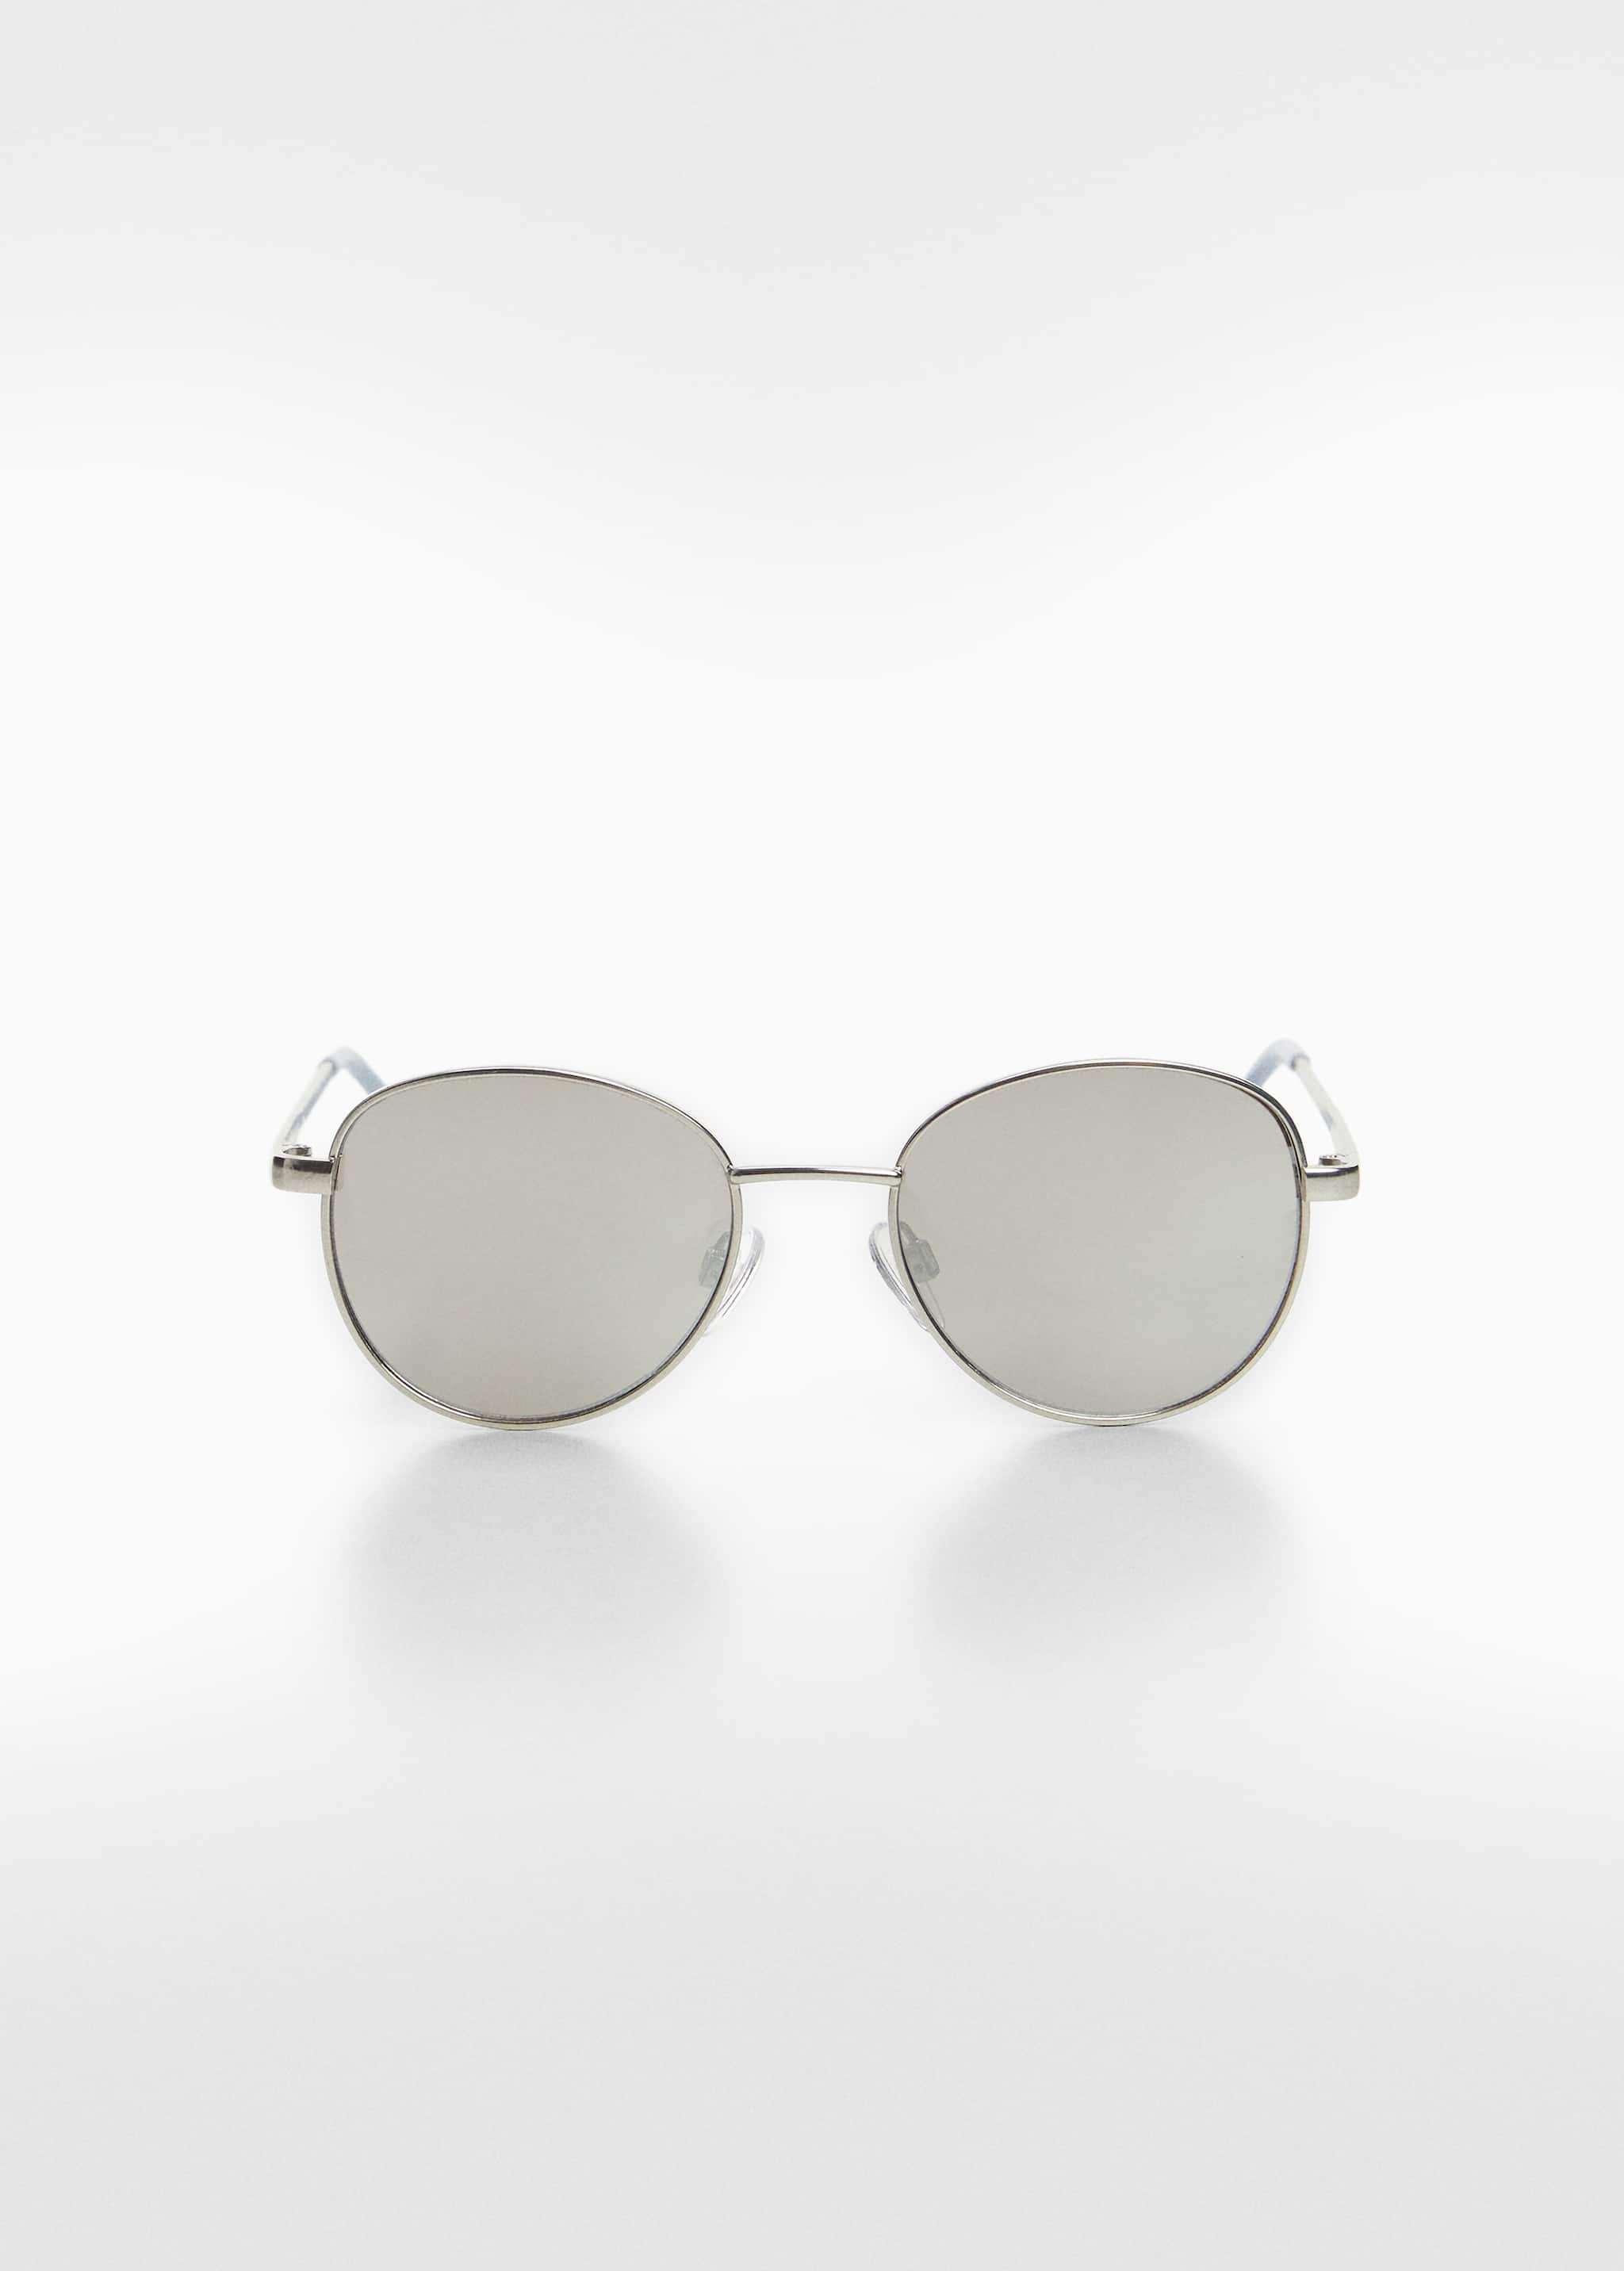 Aviator frame sunglasses - Article without model